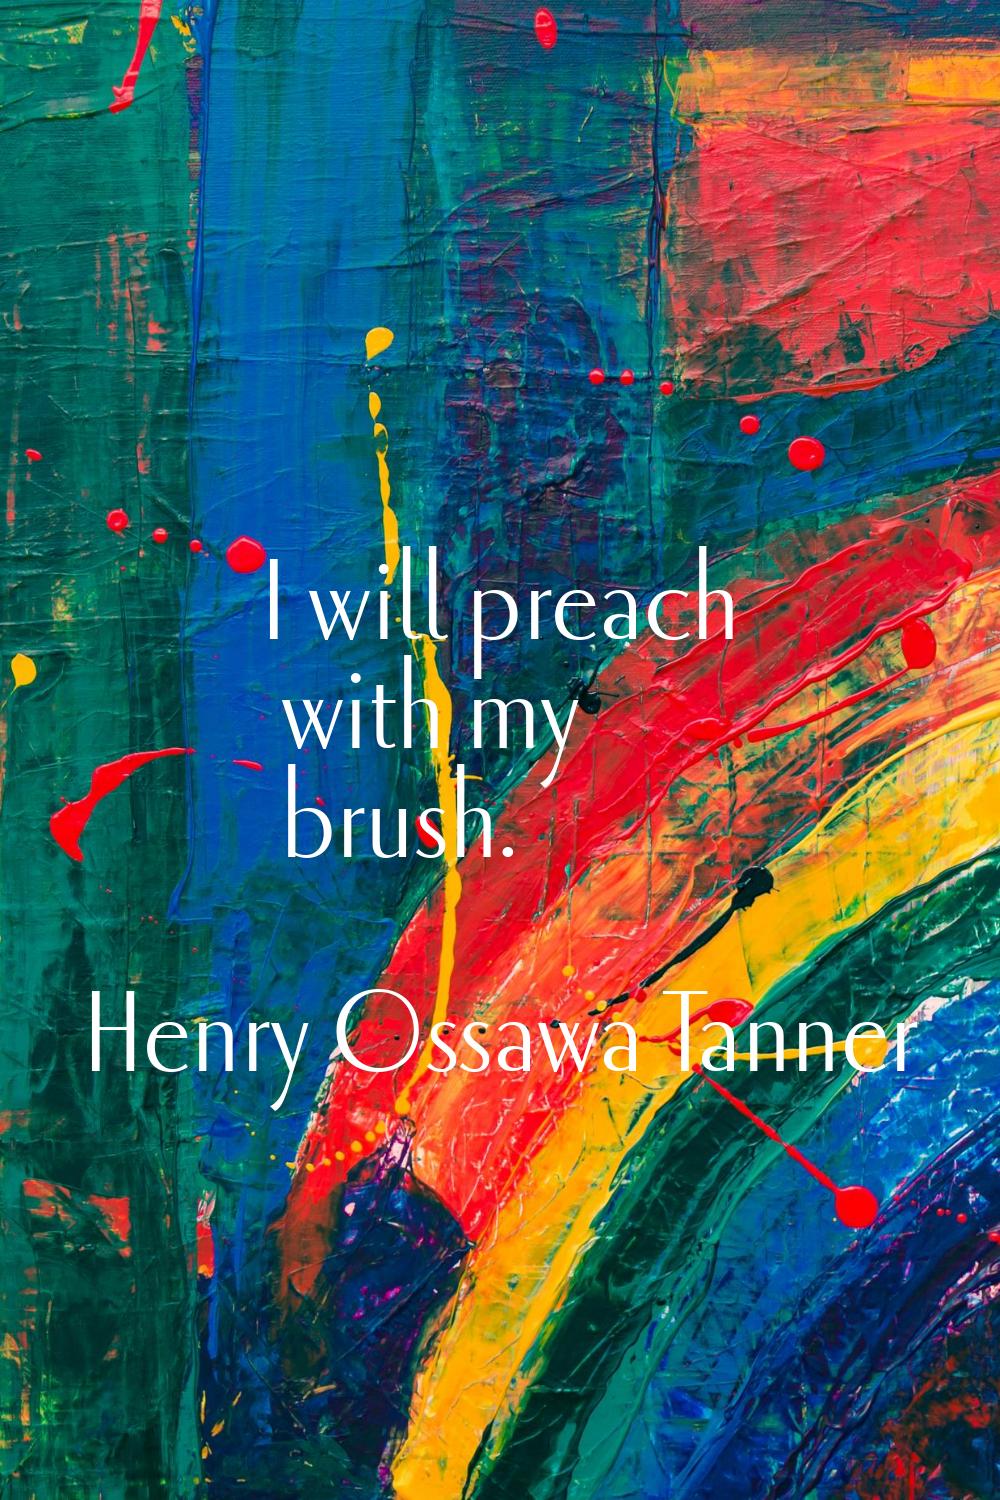 I will preach with my brush.